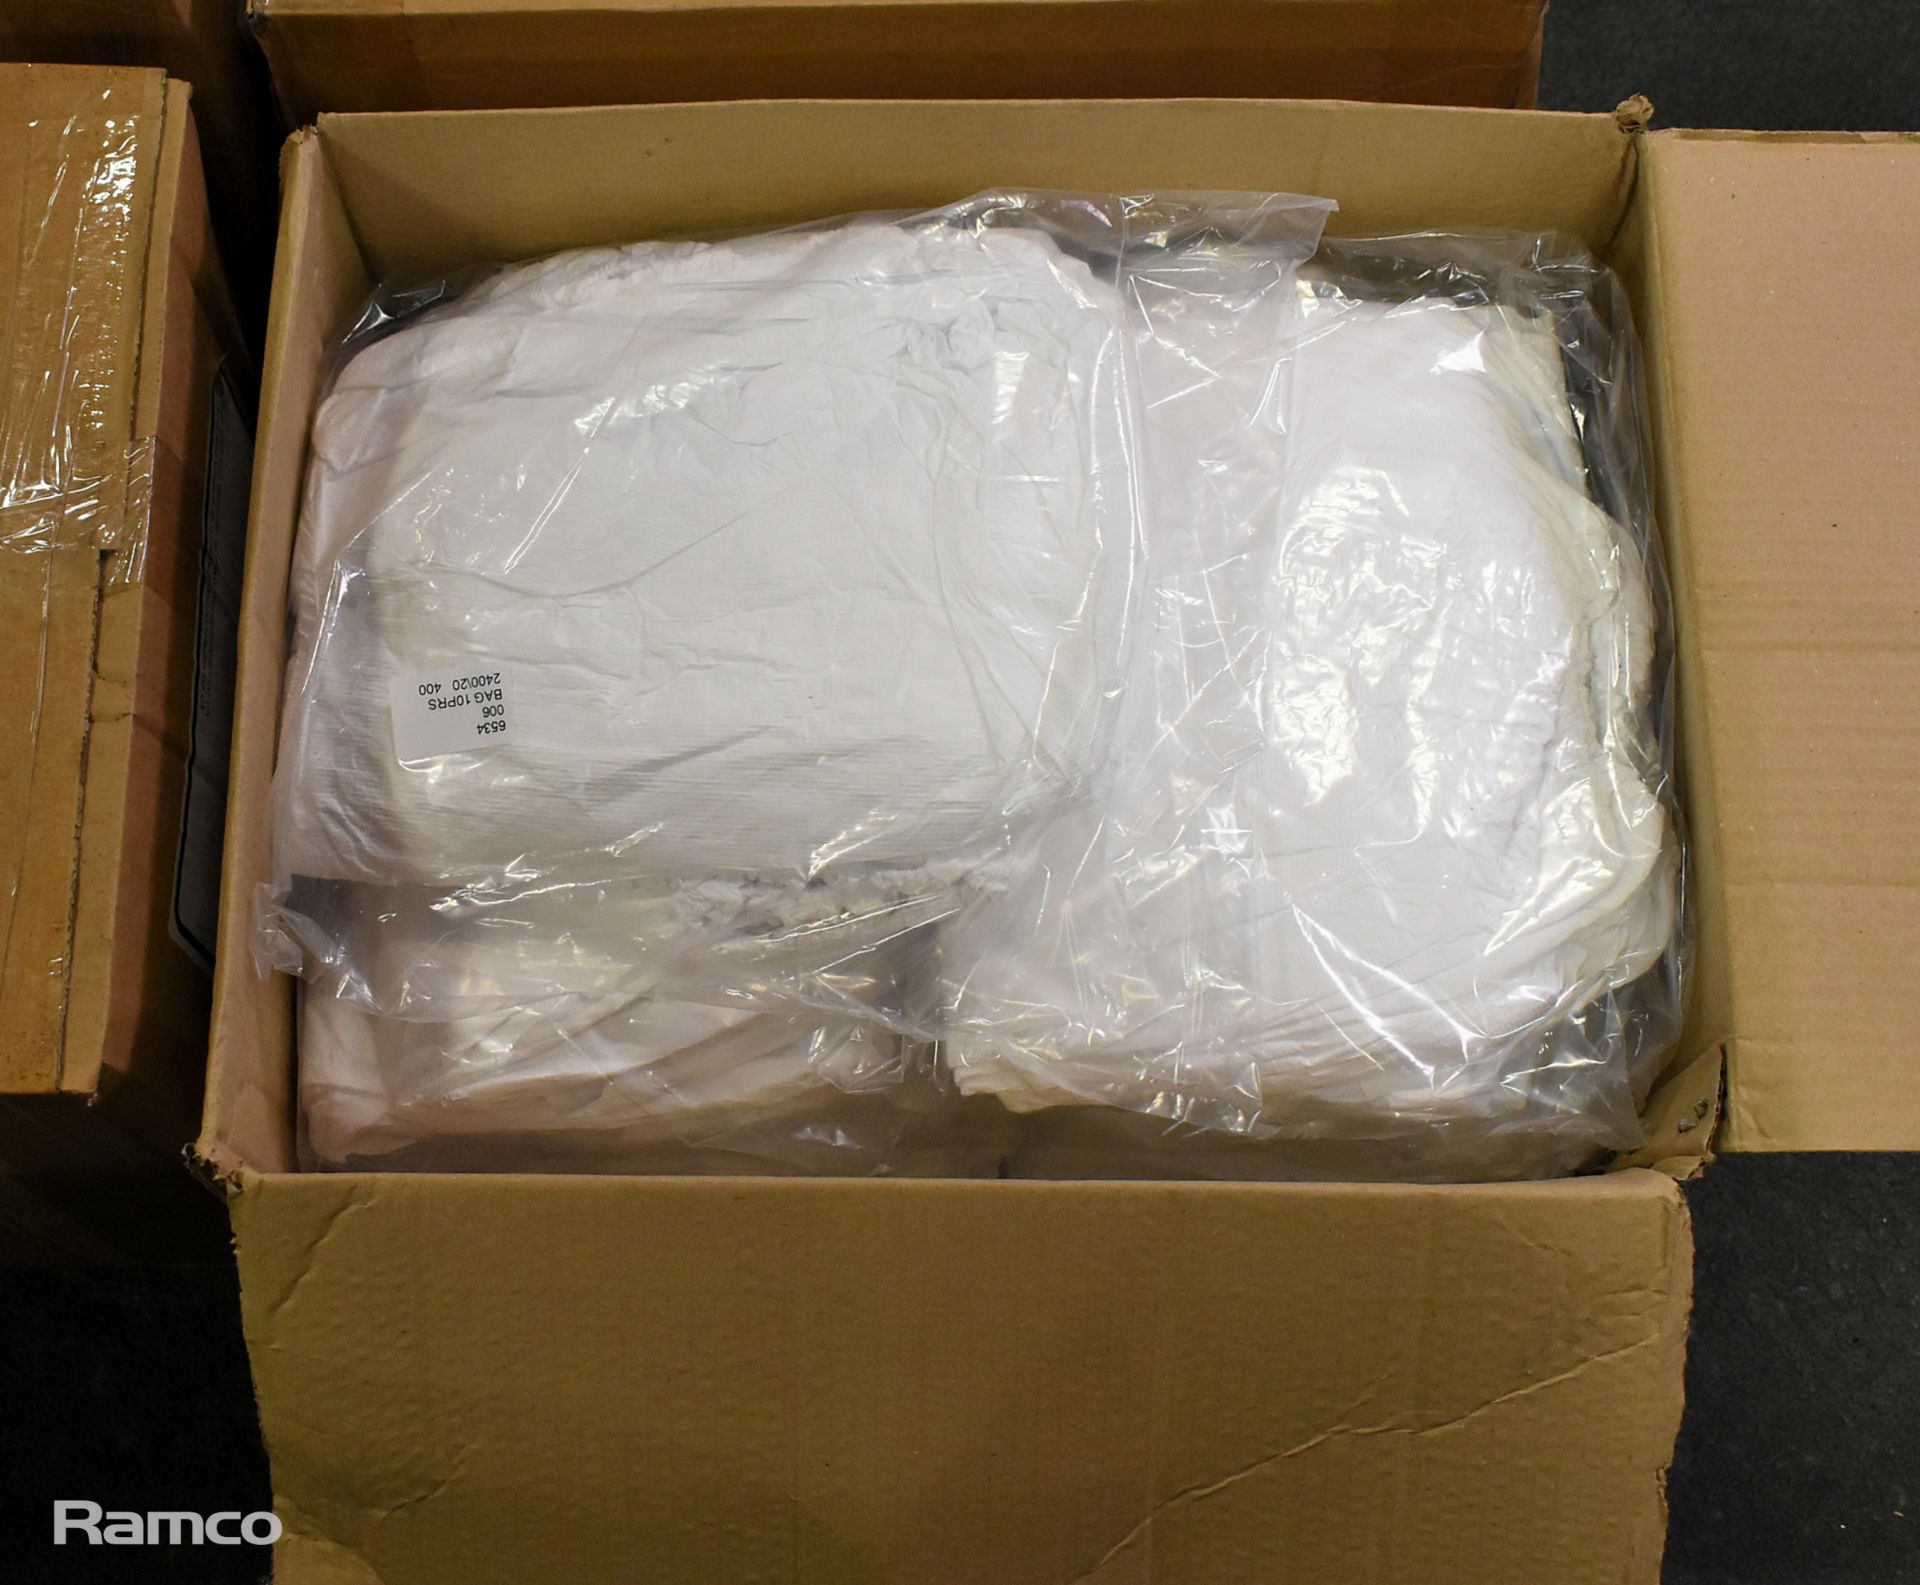 4x boxes of Tyvek overshoes with PVC soles and elasticated ankle 14" - 10 x 10 pairs per box